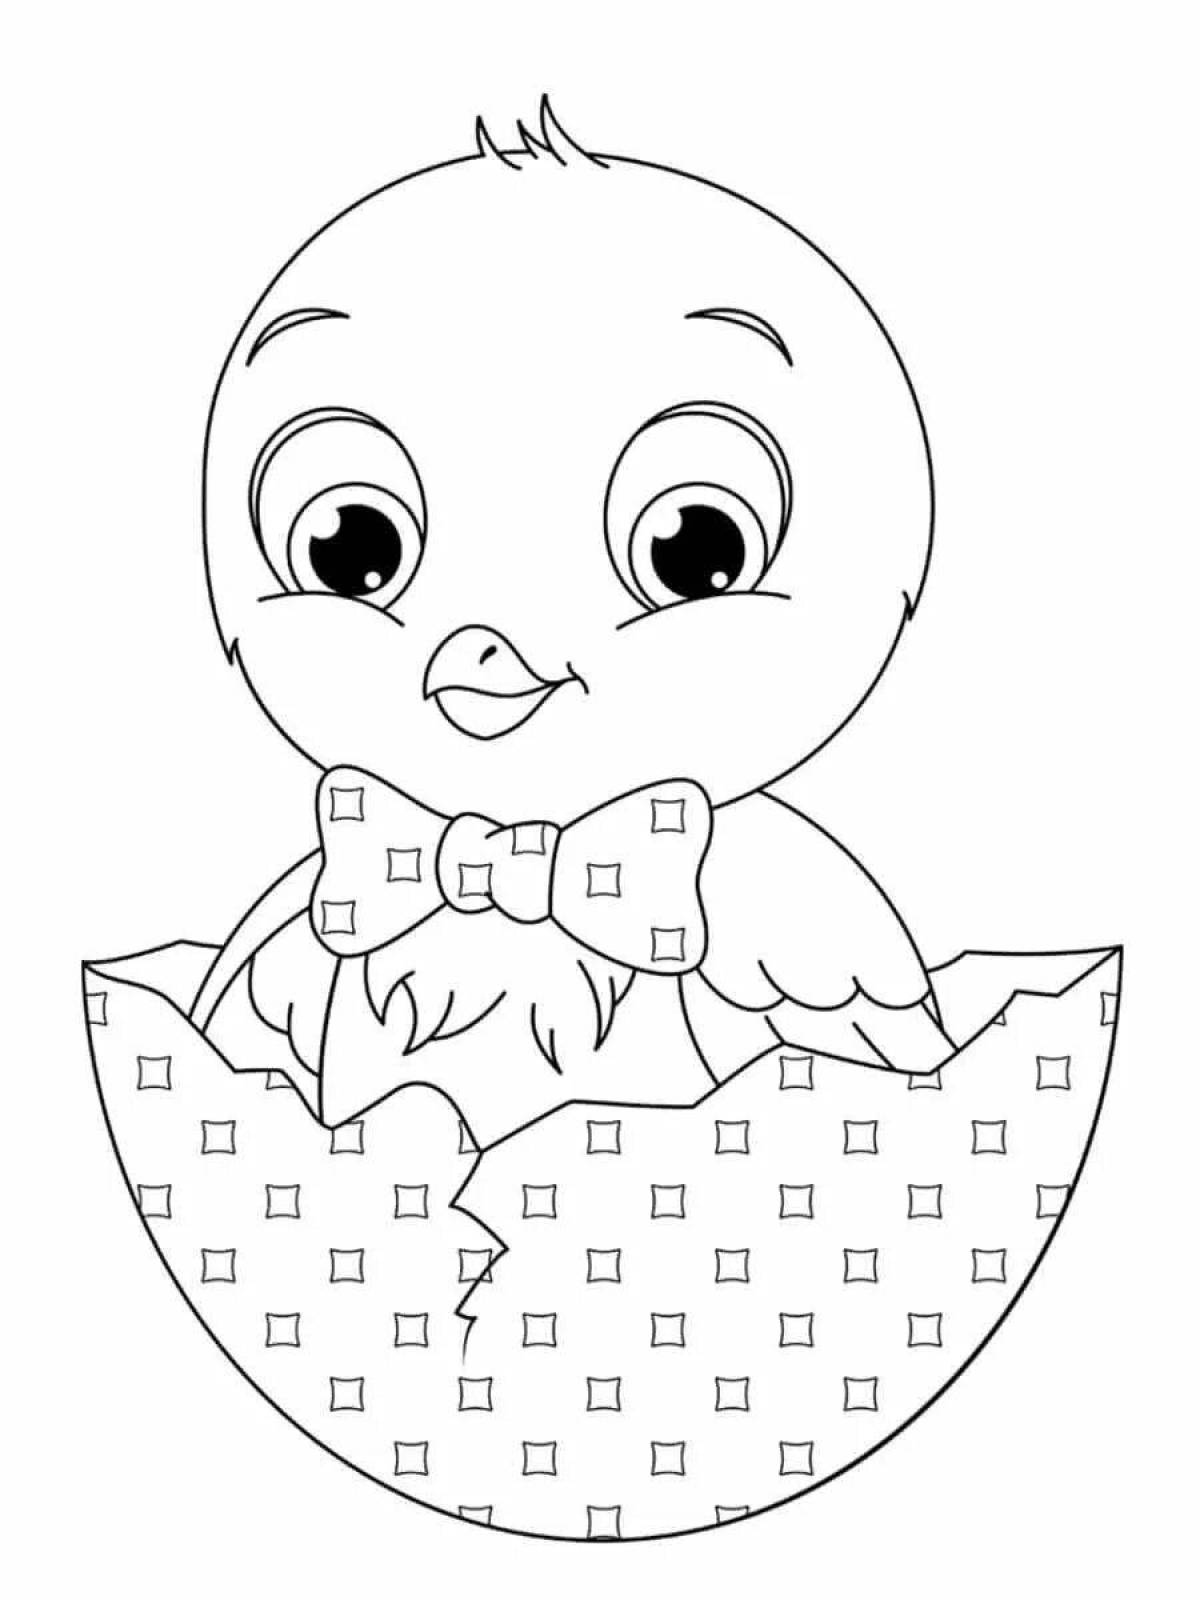 Coloring page gorgeous chicken in shell